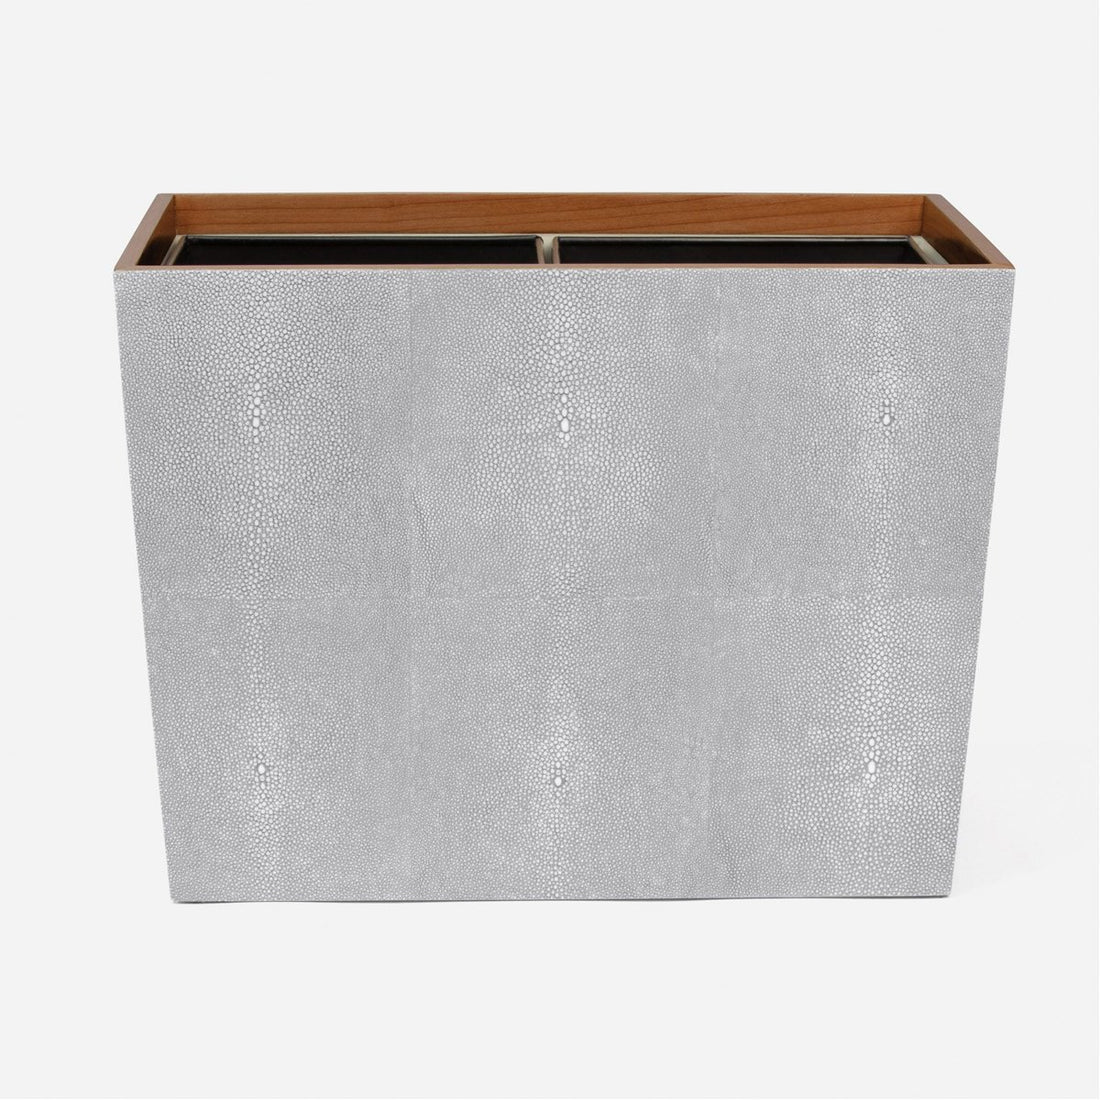 Pigeon and Poodle Manchester Double Rectangular Wastebasket, Tapered